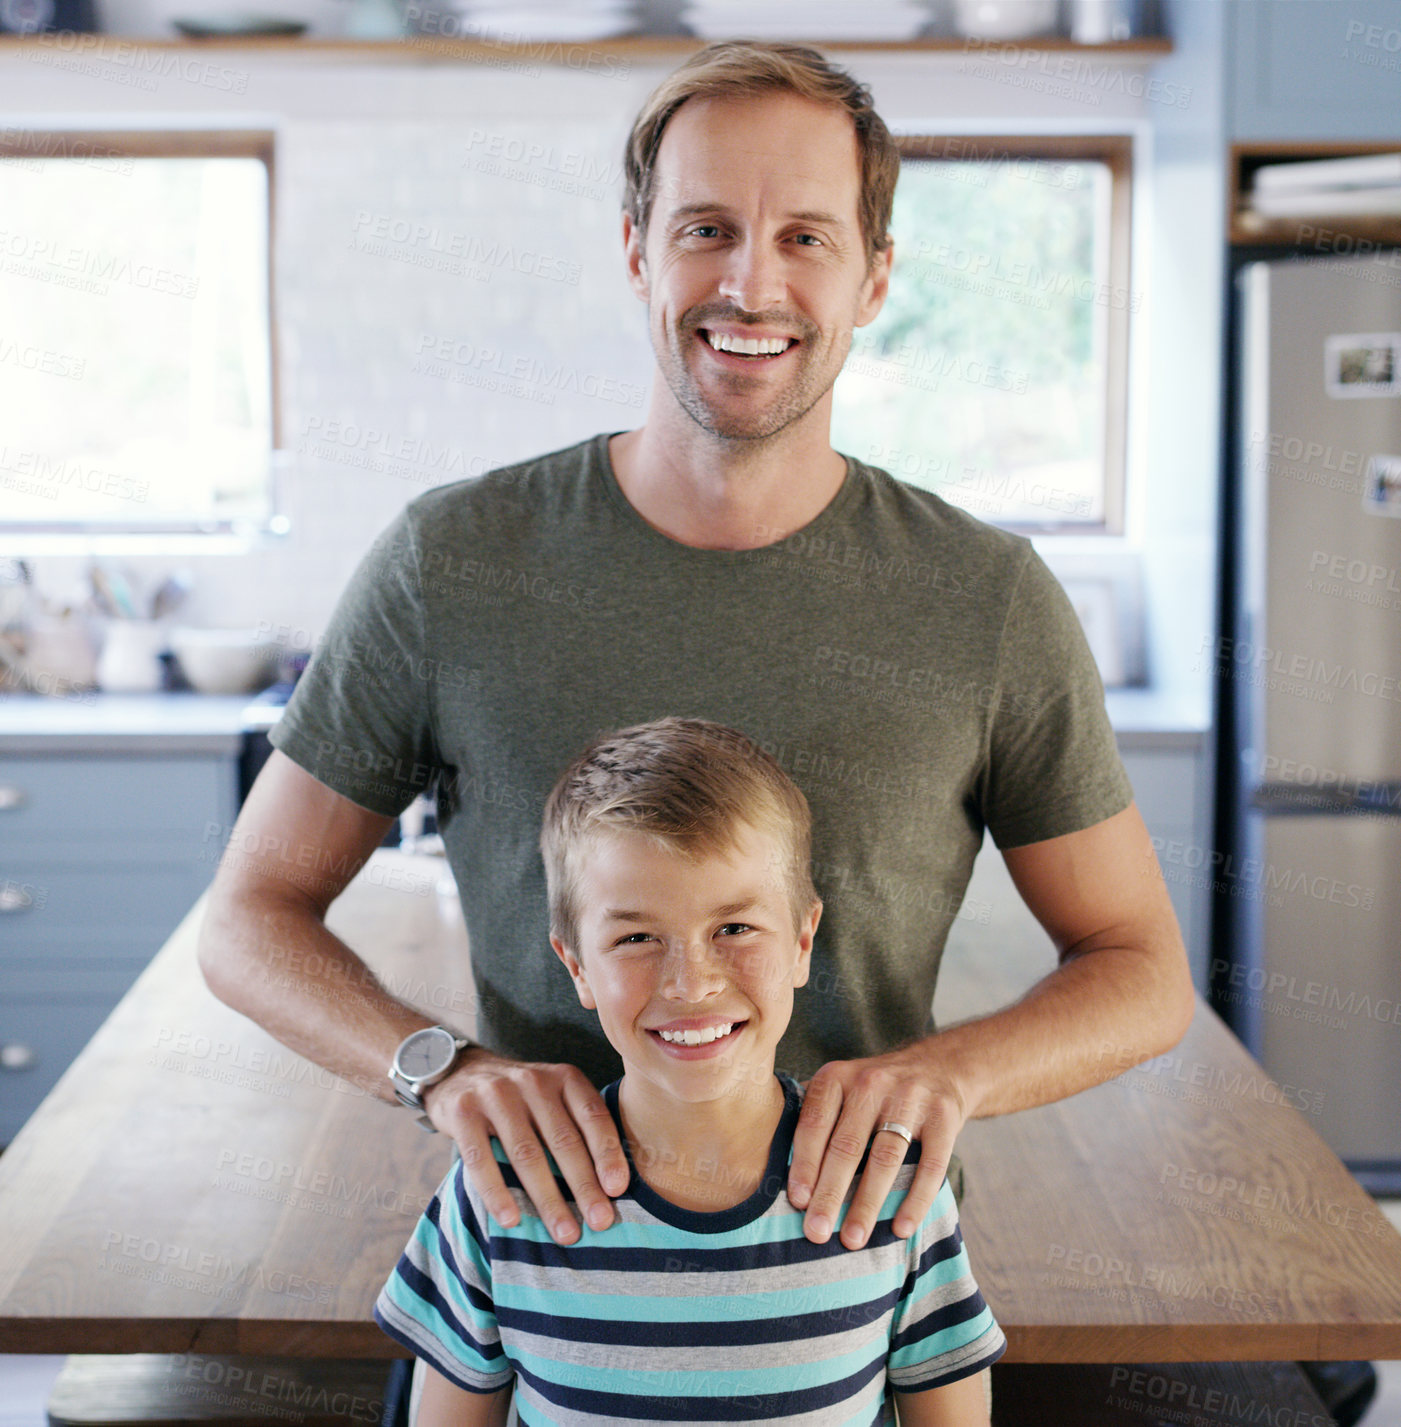 Buy stock photo Cropped portrait of an affectionate young father looking cheerful while standing with his son in their kitchen at home